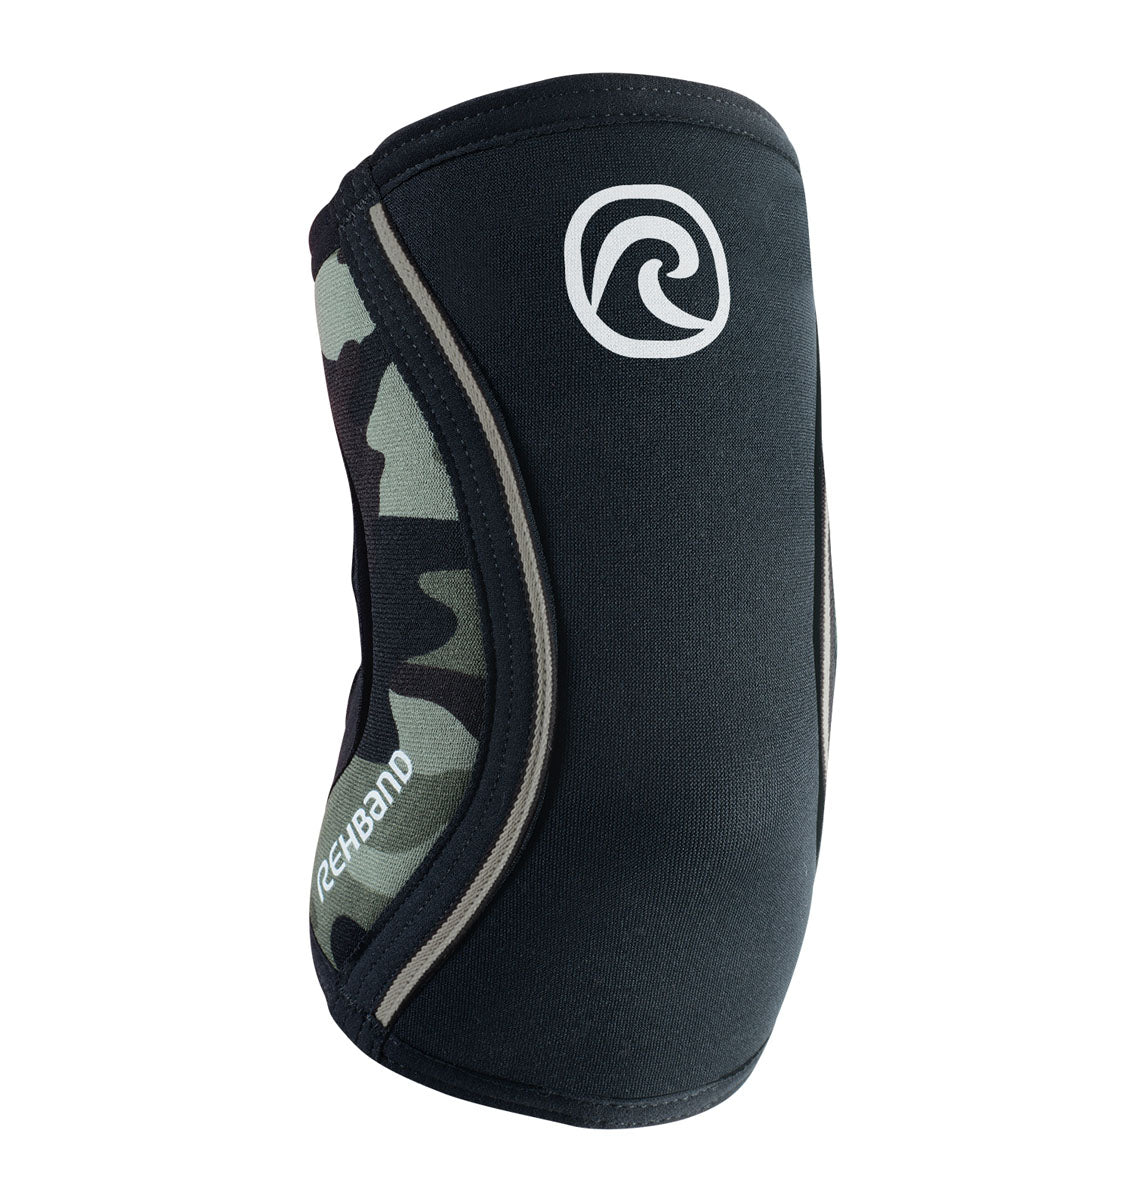 102331 - Rehband Rx Elbow Sleeve - Camo - 5mm - Front